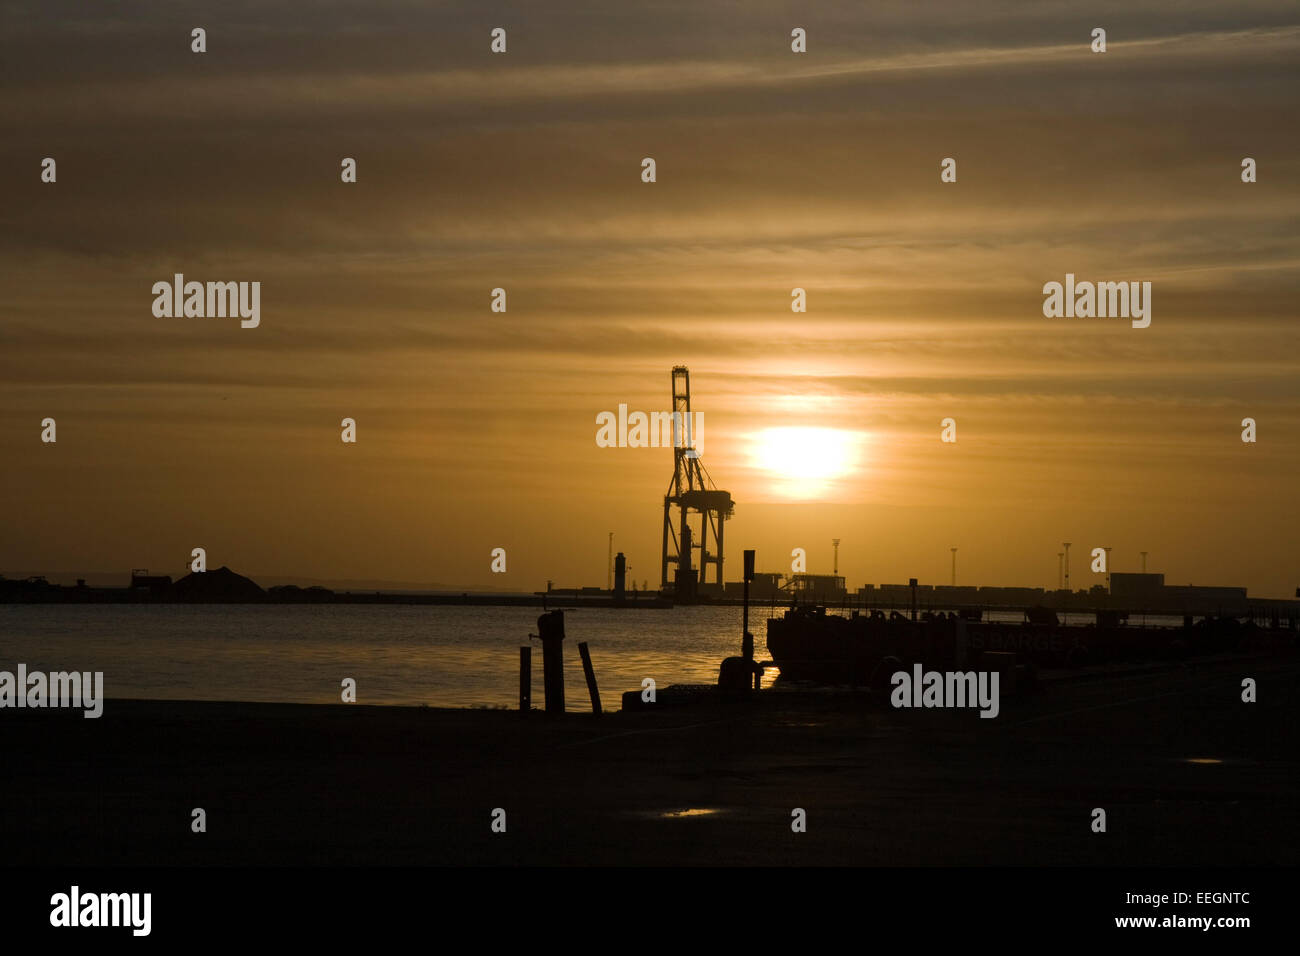 Sunrise over the Harbour. Can be used as background Stock Photo